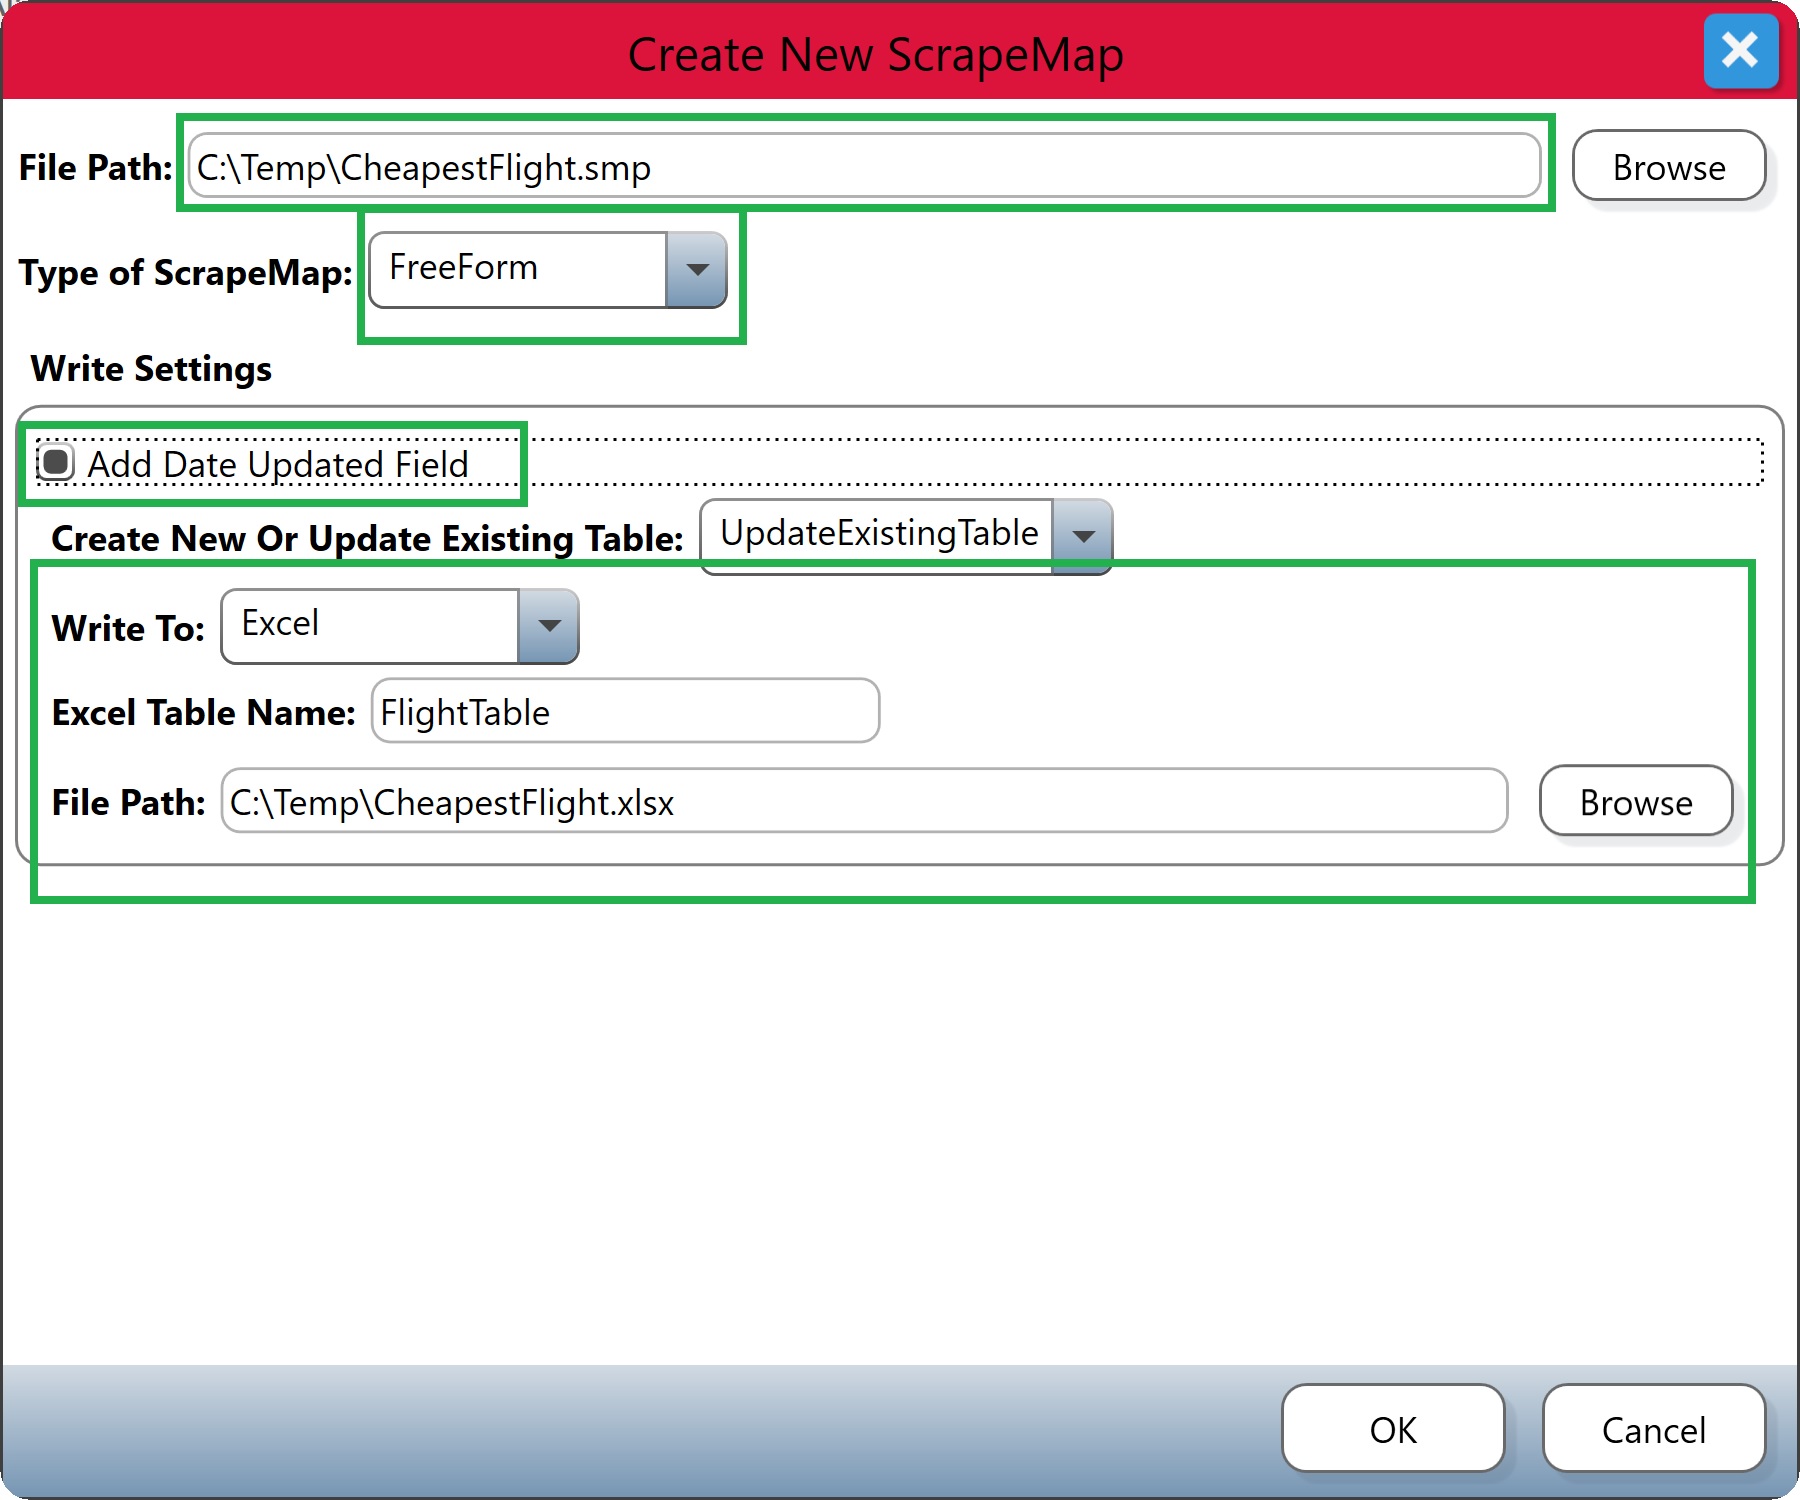 Create New ScrapeMap dialog with various data highlighted